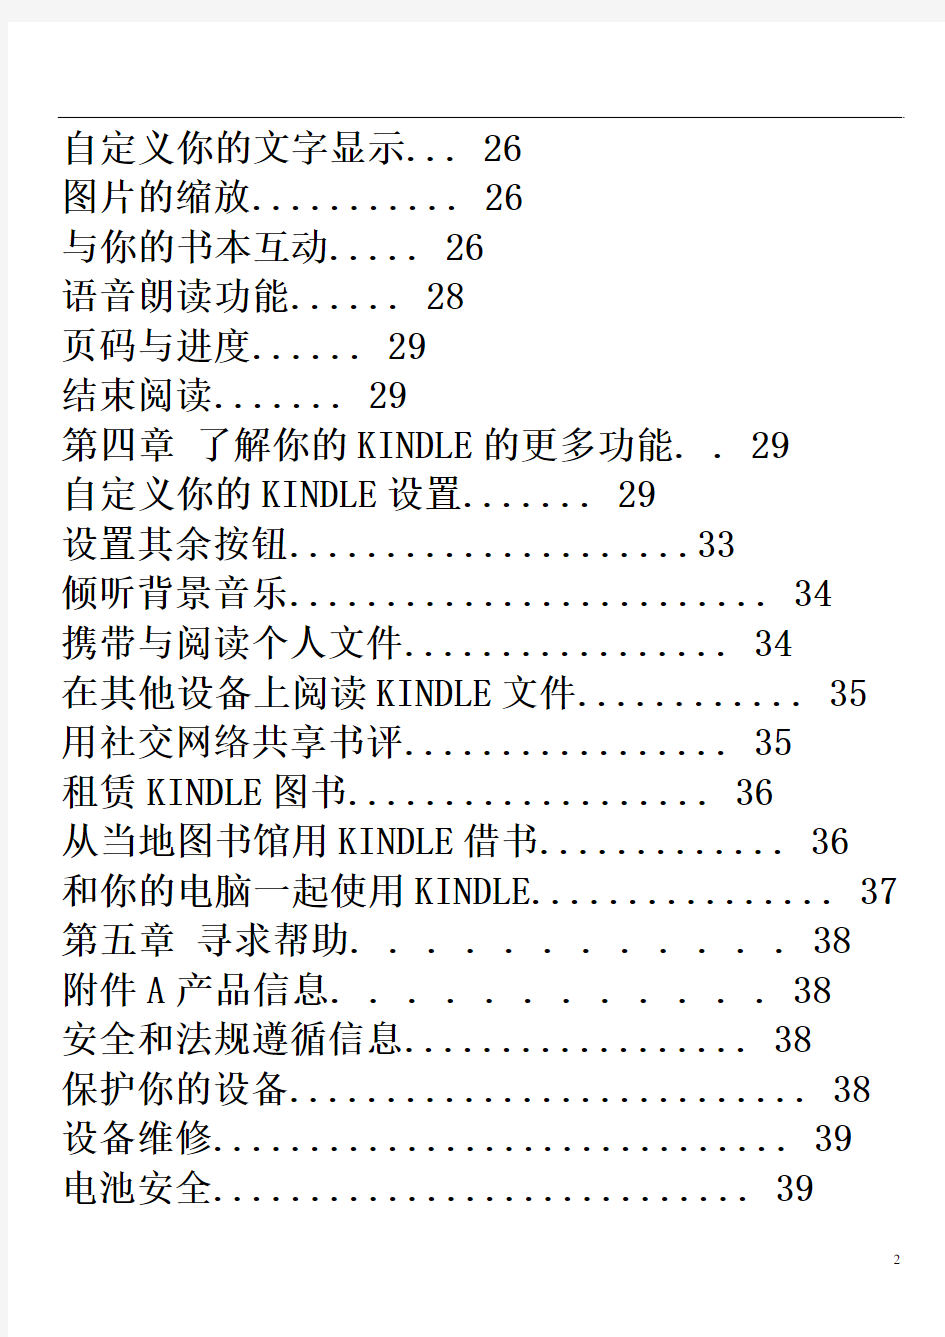 Kindle touch 中文说明书